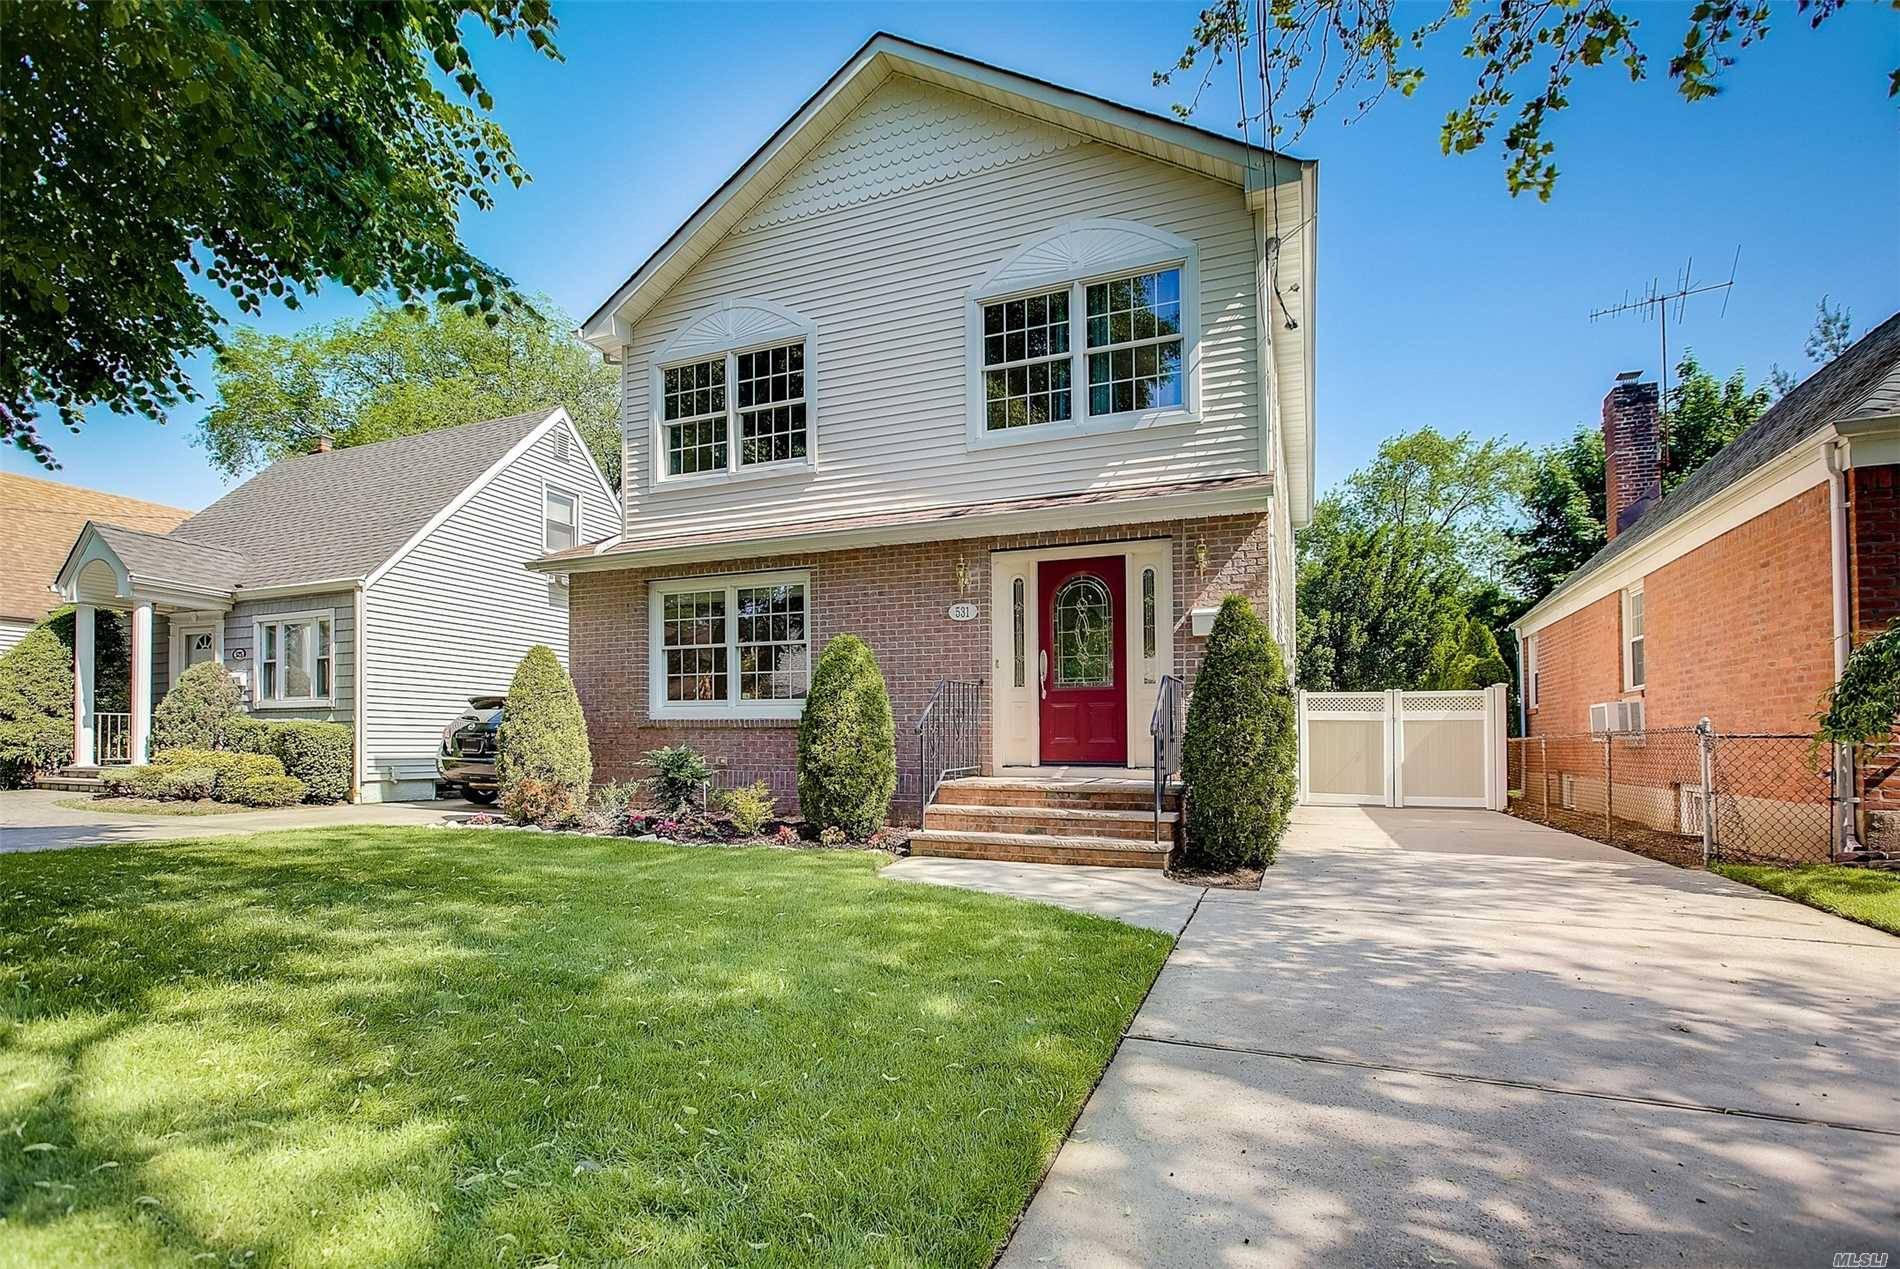 This spacious south facing, move in ready home boasts 5 bedrooms, 3 full baths, fully finished basement and private backyard with oversized back porch tucked away on a quiet tree ...